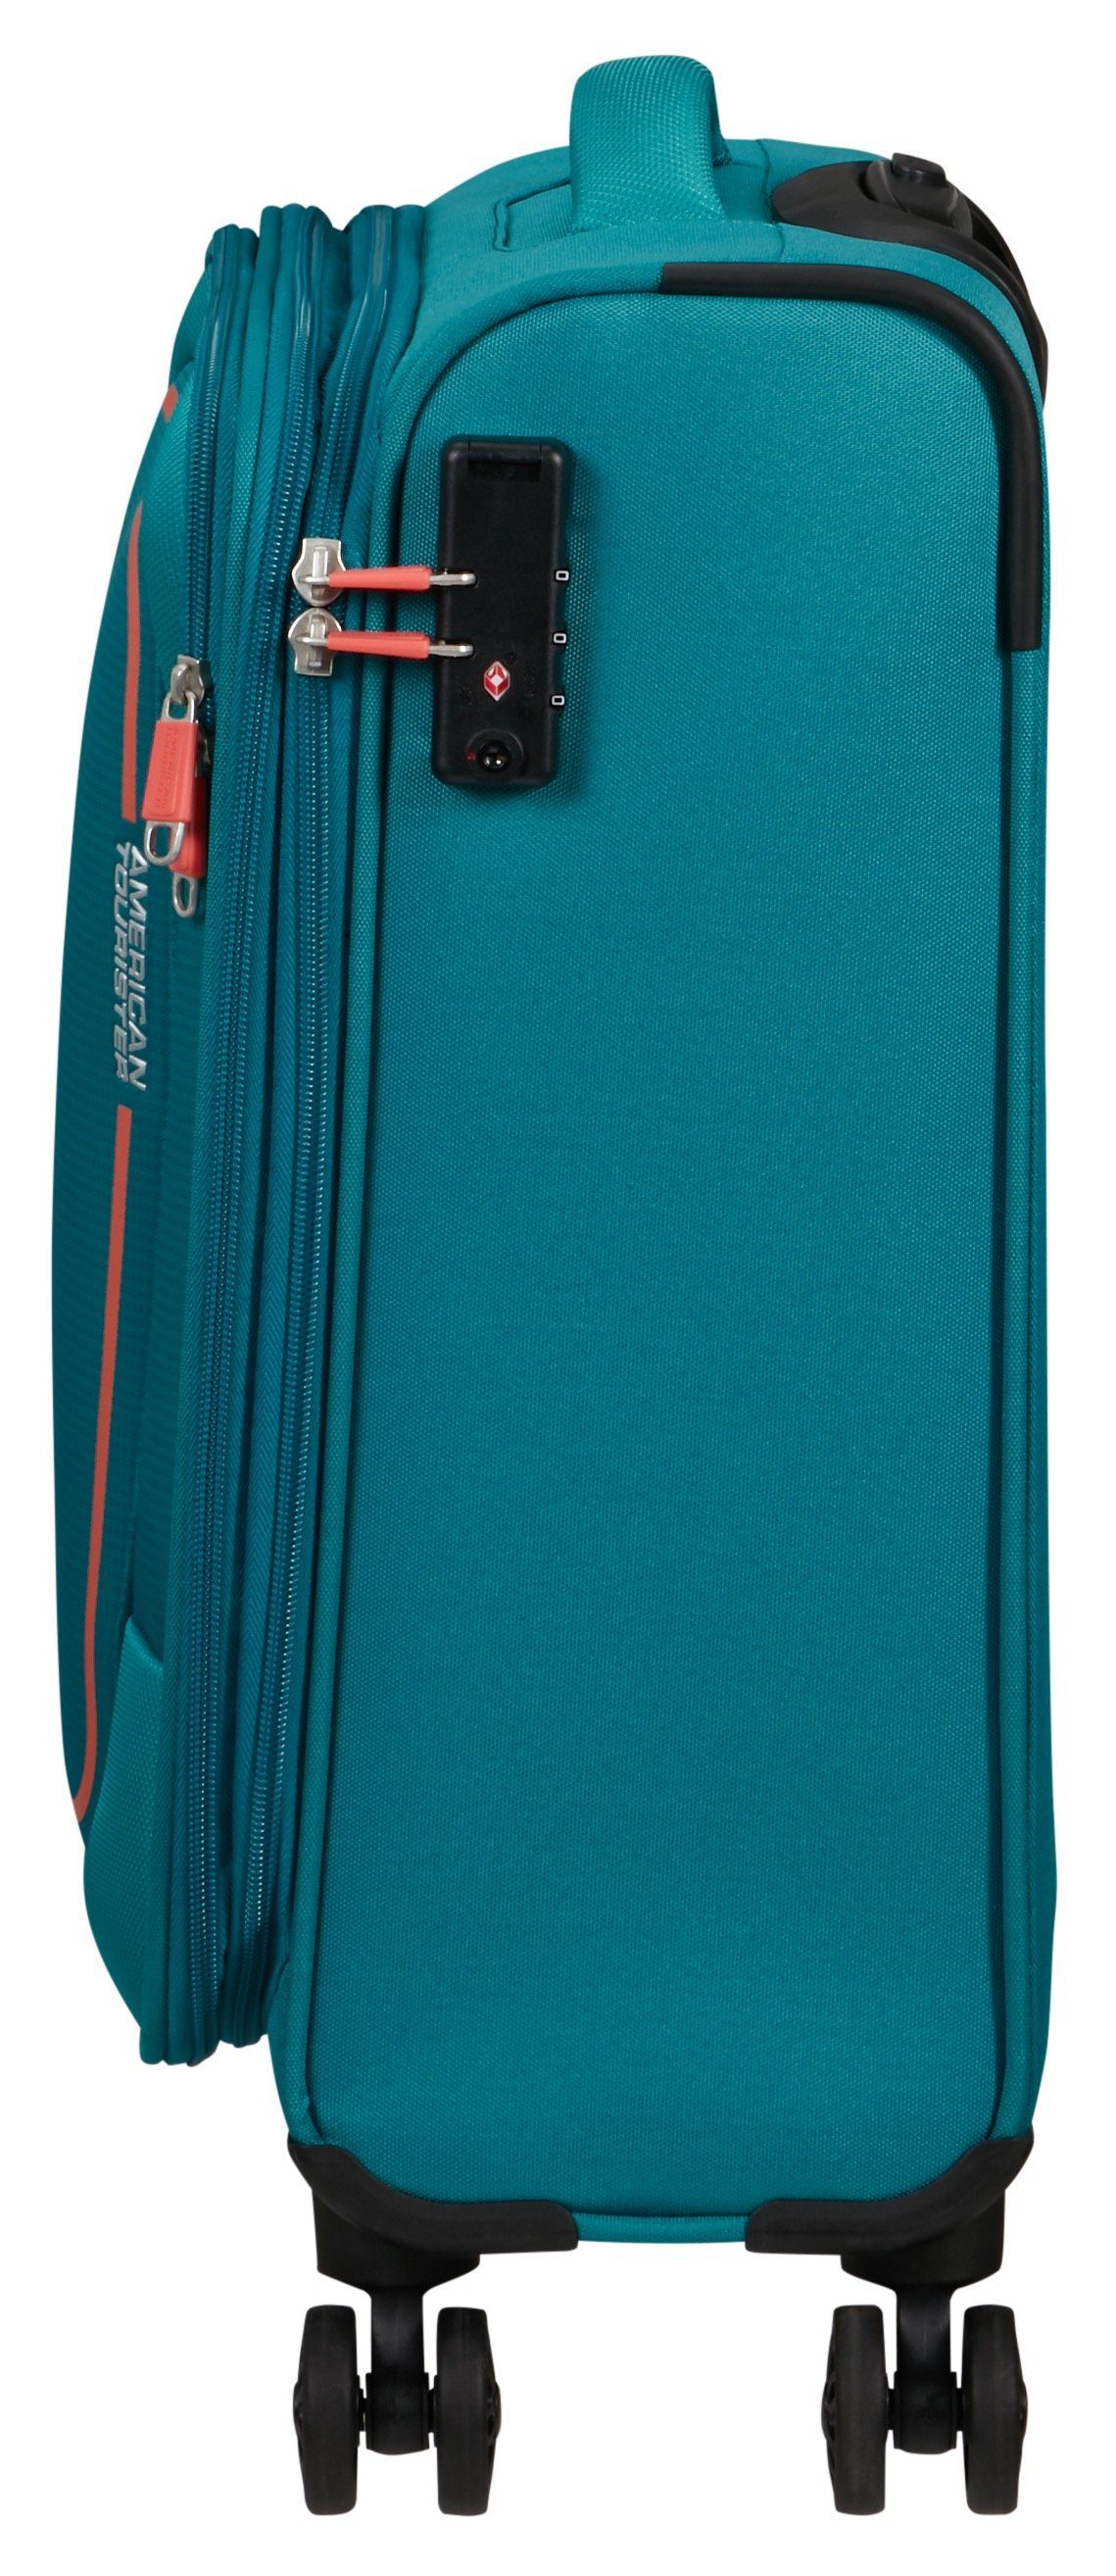 Spinner 4 PULSONIC Koffer stone American Rollen 55, teal Tourister®